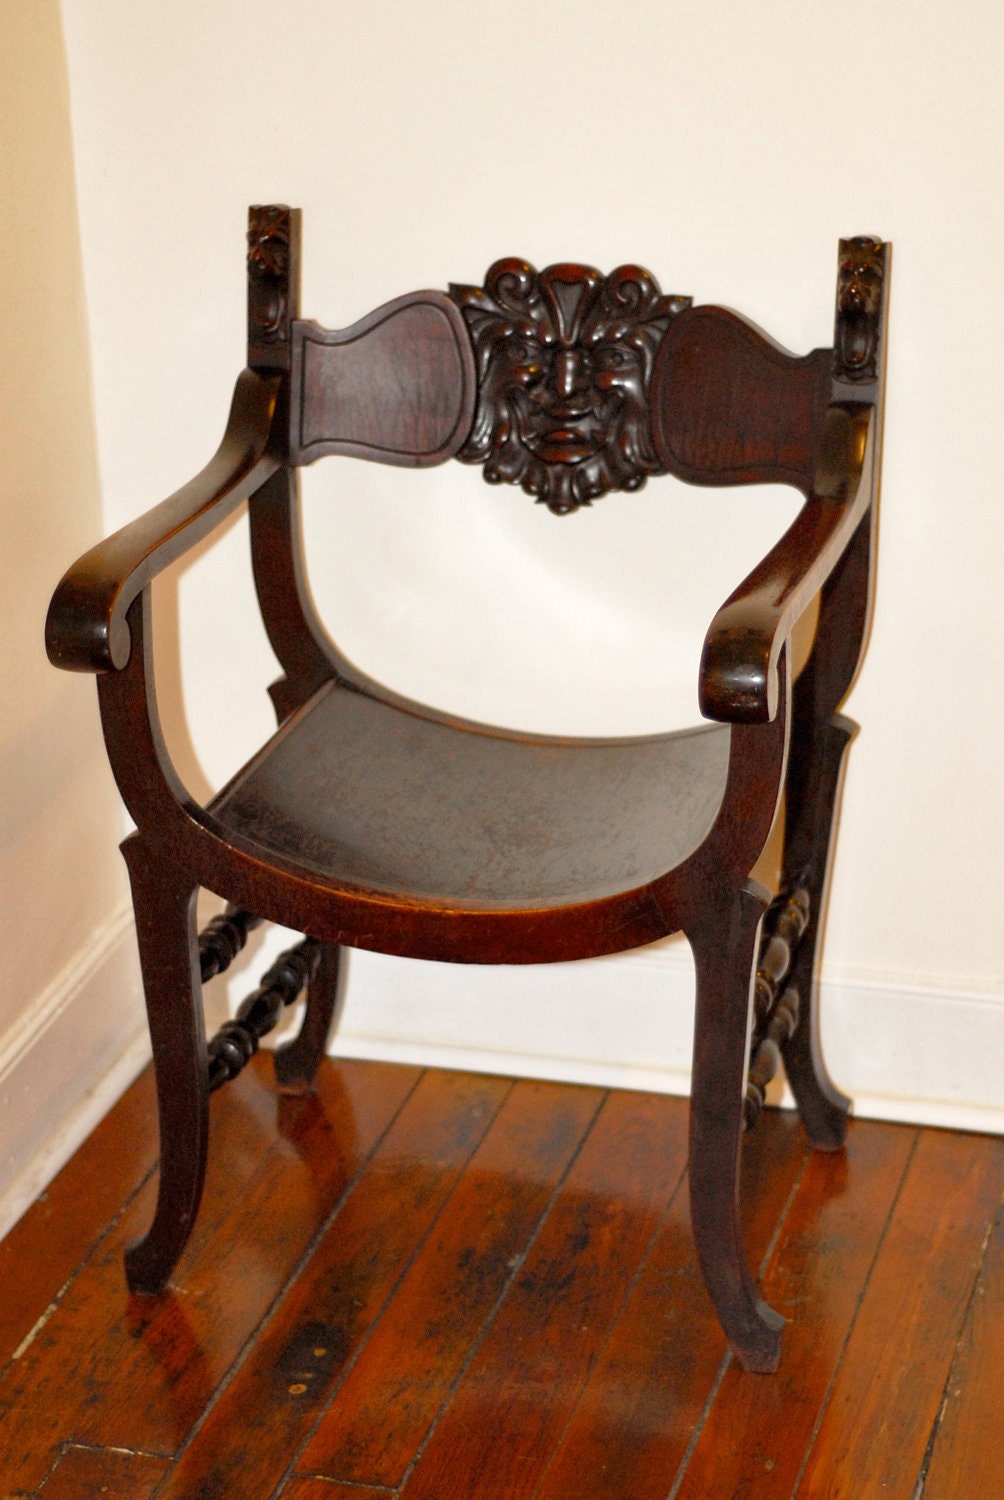 CARVED NORTH WIND DIRECTORS CHAIR C1890 - EARLY PRIMITIVE BURL